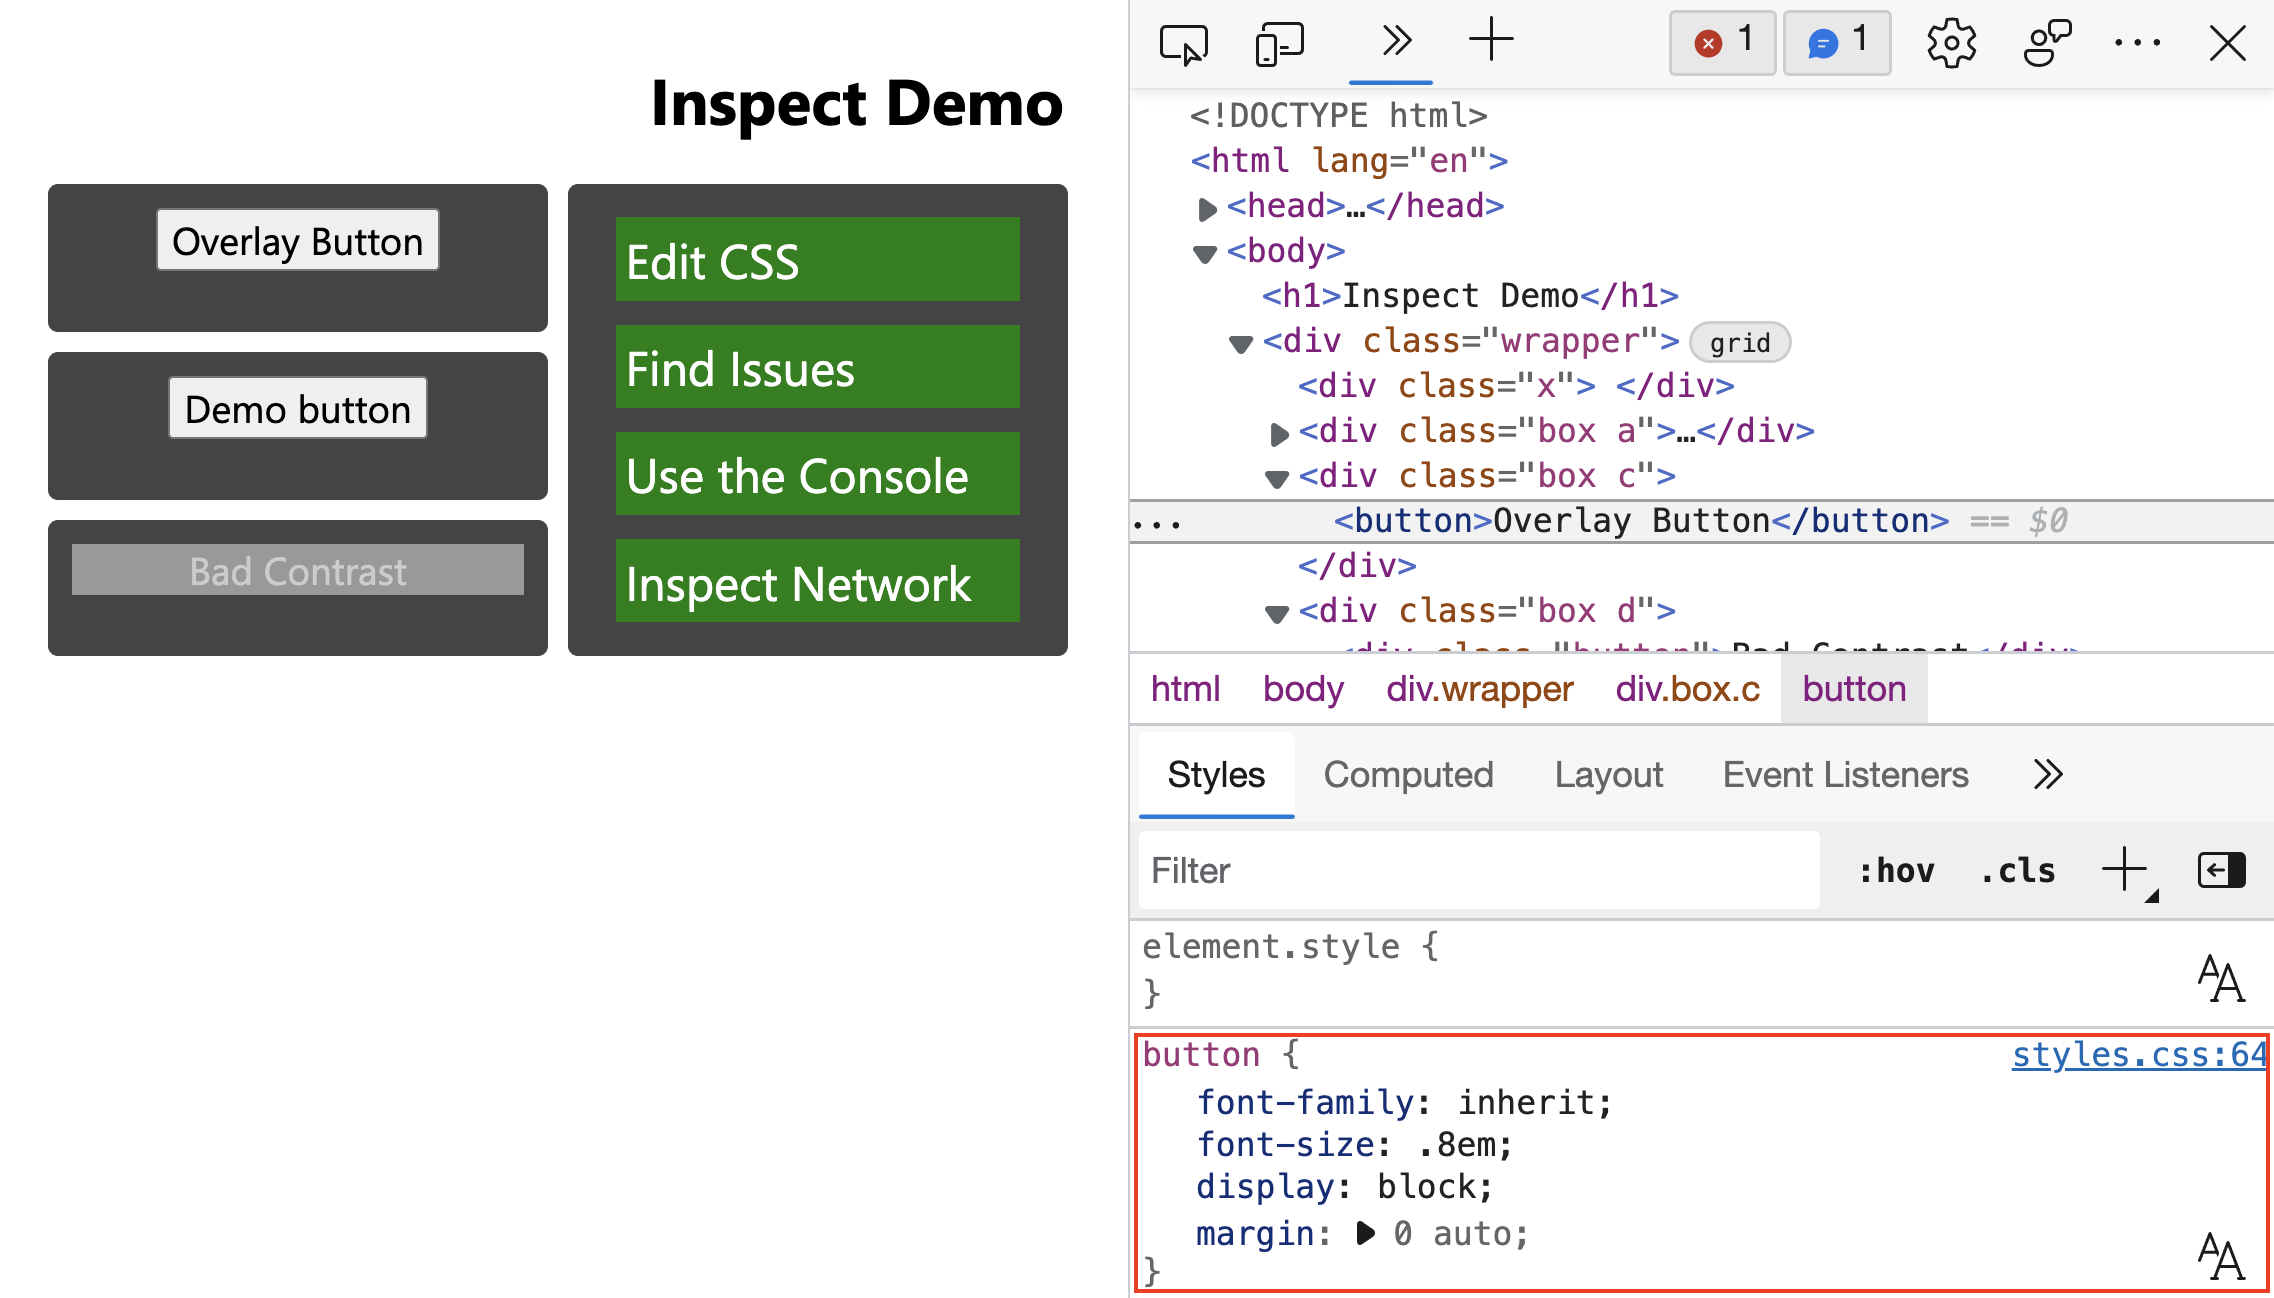 When you click an element in the rendered page, the Styles tool shows the styles that are applied to the element